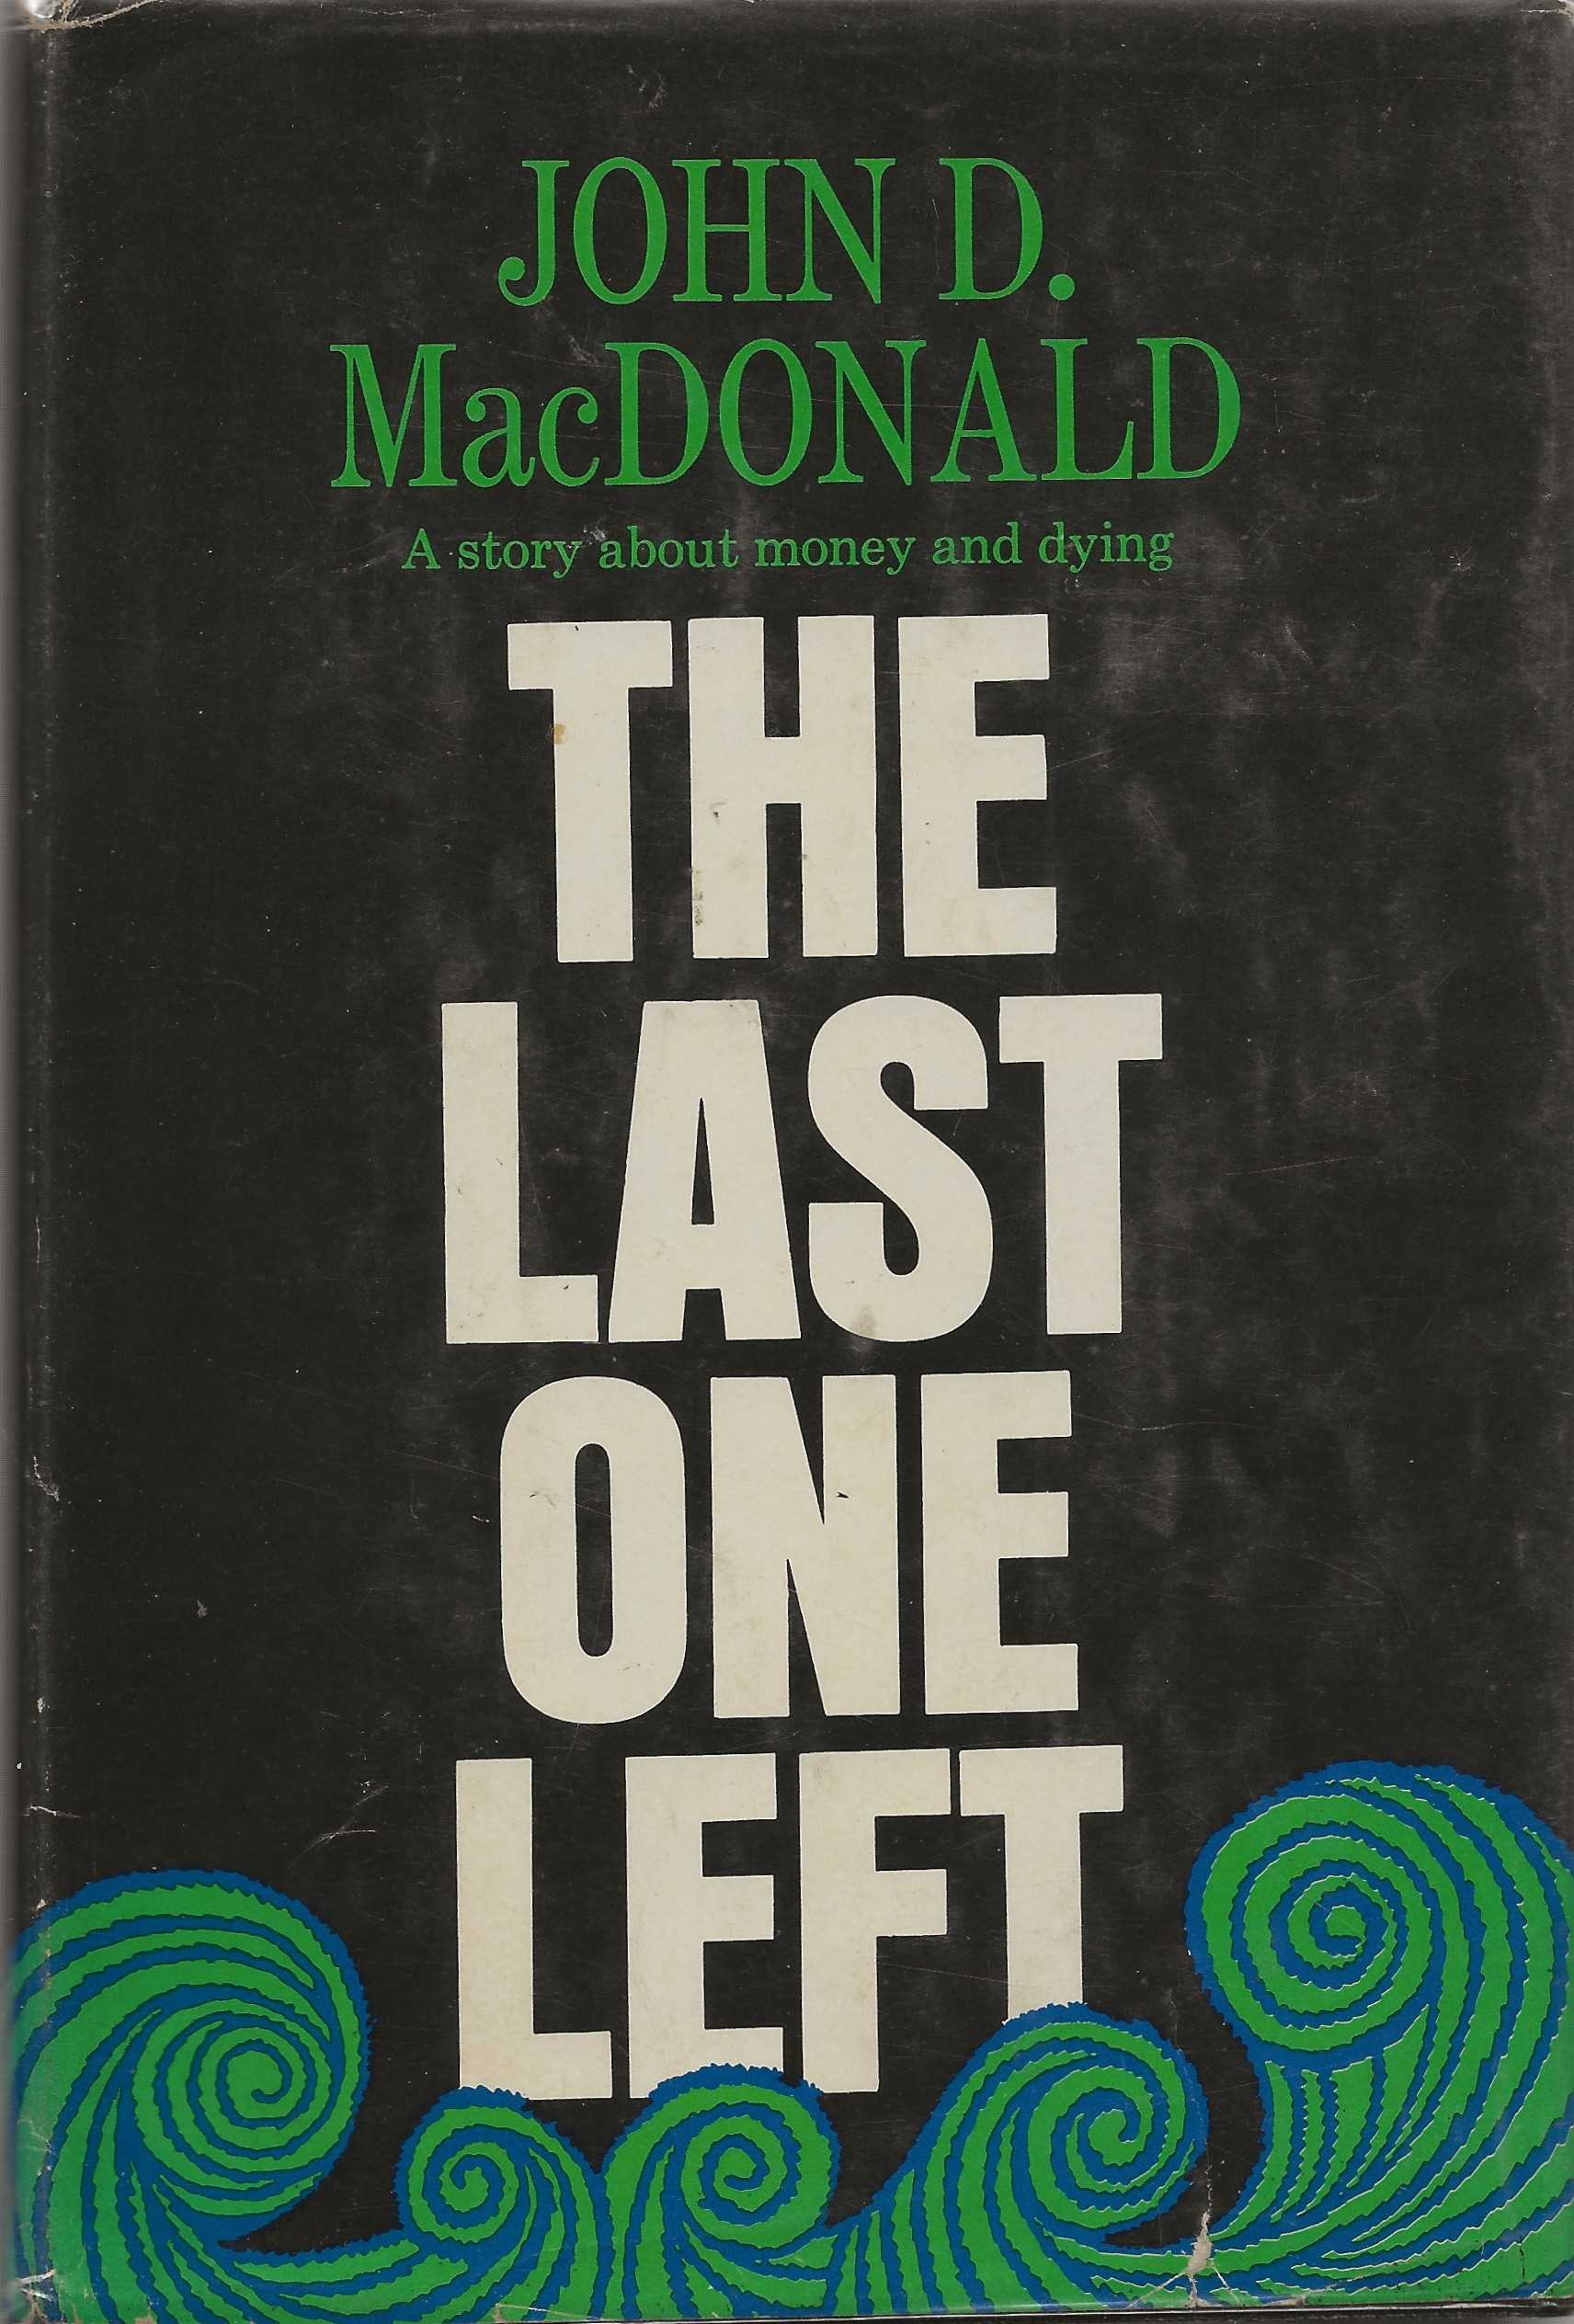 AcornBooksNH　Edition.,　The　by　John　Last　First　One　Left　Hardcover　Signed　by　MacDonald,　D.:　NF　(1967)　Author(s)